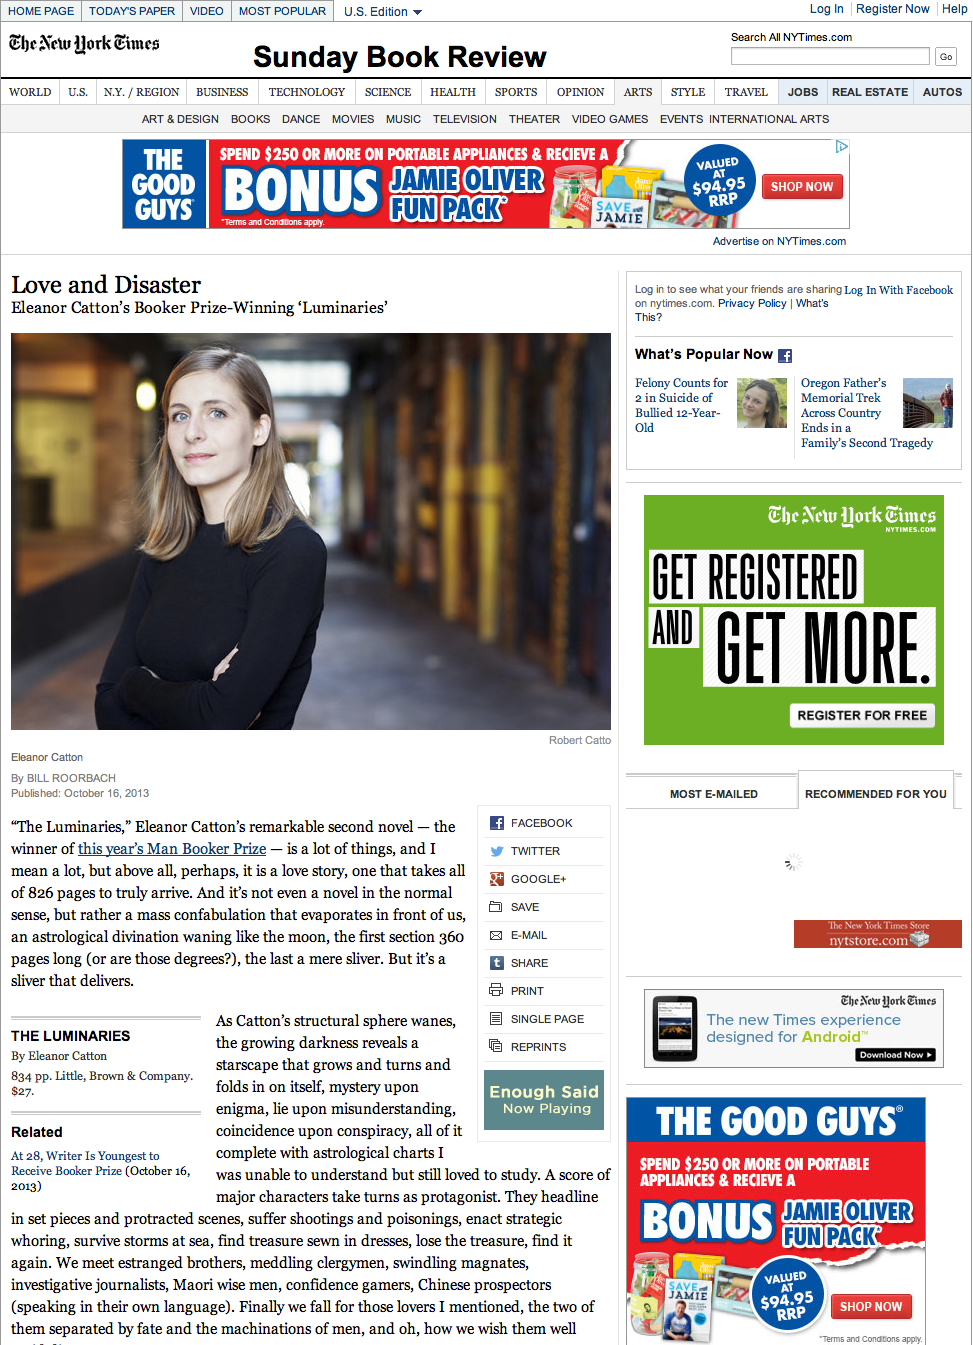 Eleanor Catton in the New York Times Review of Books